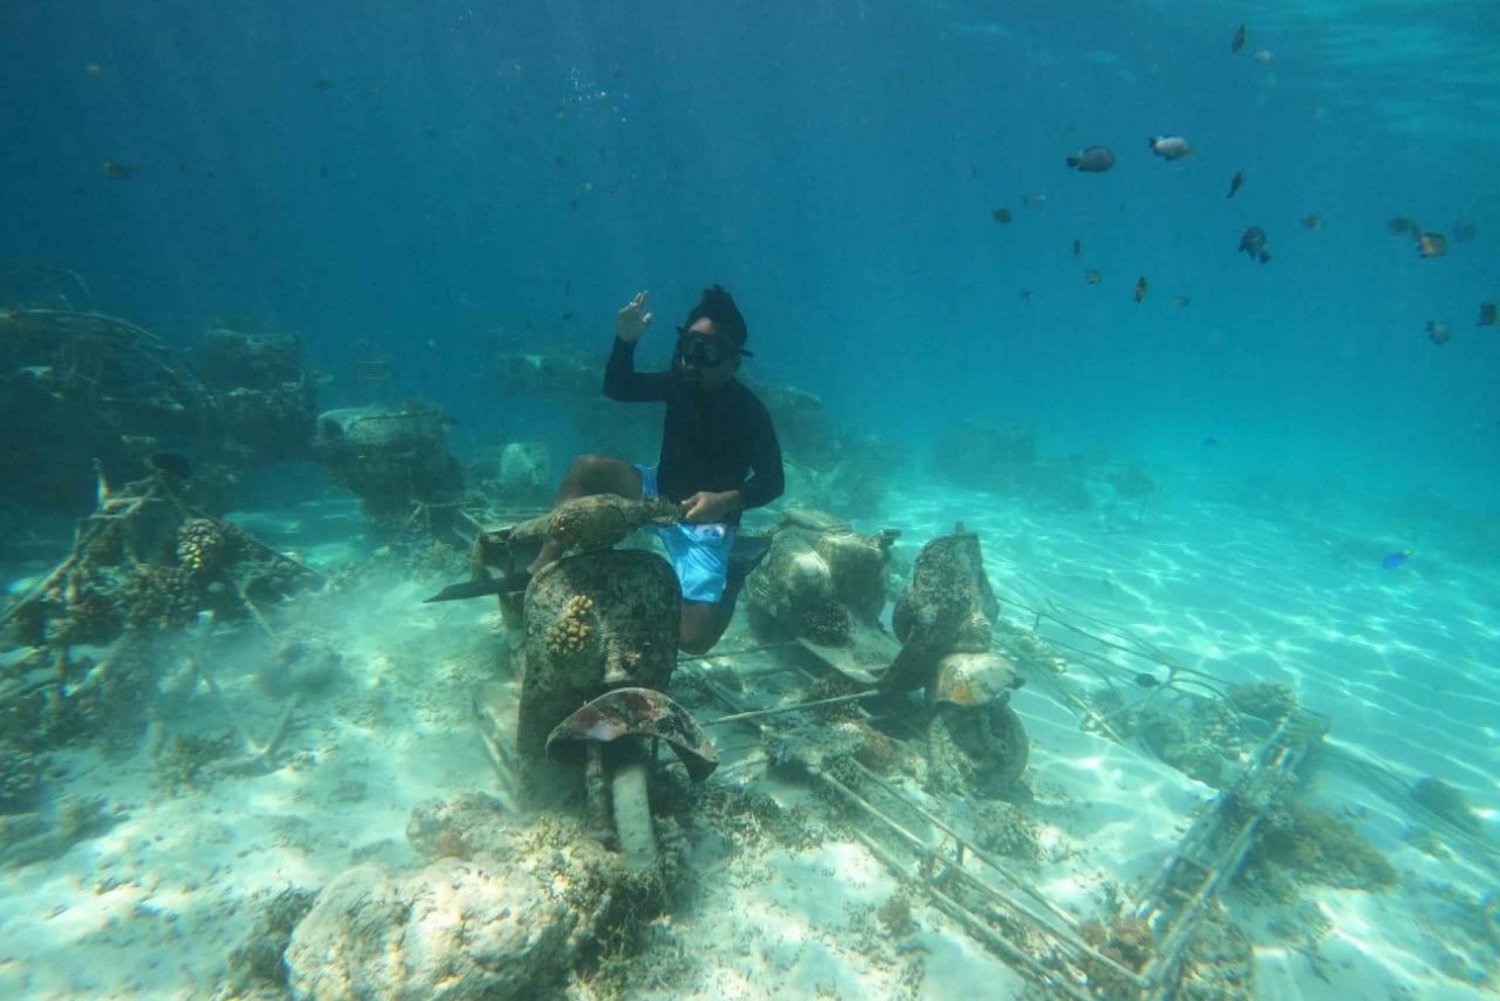 Exploring-the-Underwater-Statue-at-Nest-Statue-Point